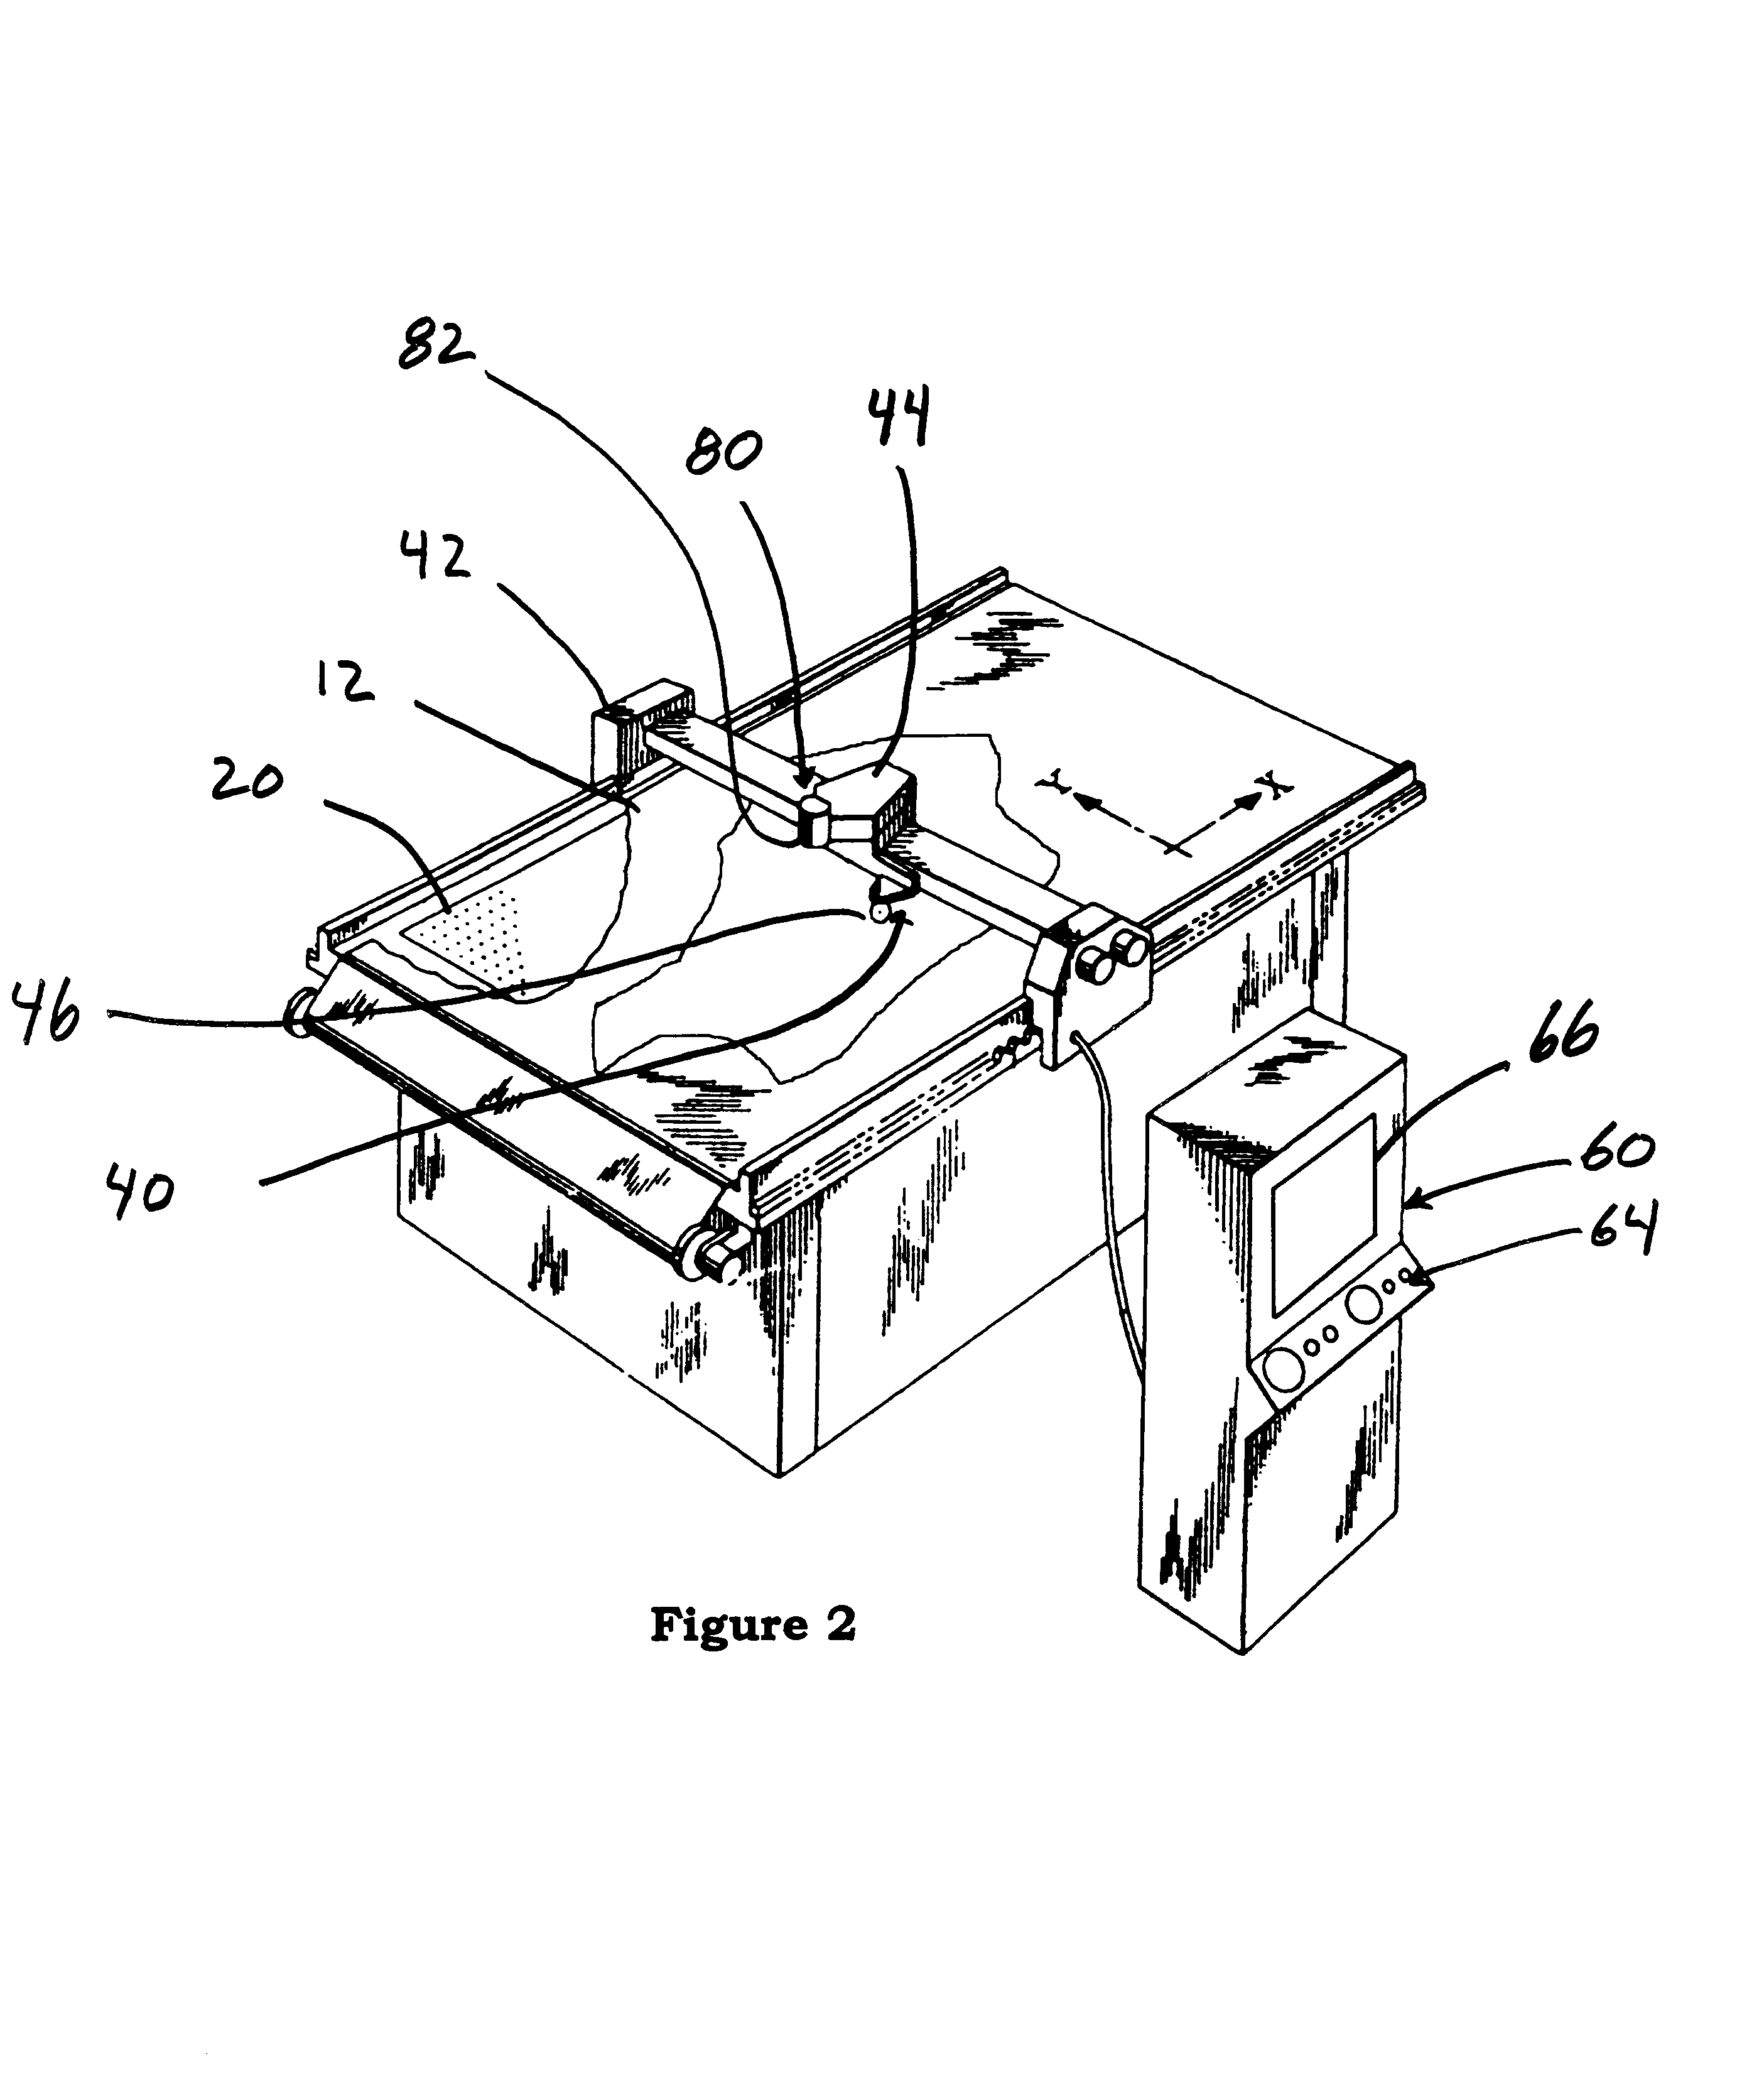 Method and apparatus for displaying an image of a sheet material and cutting parts from the sheet material